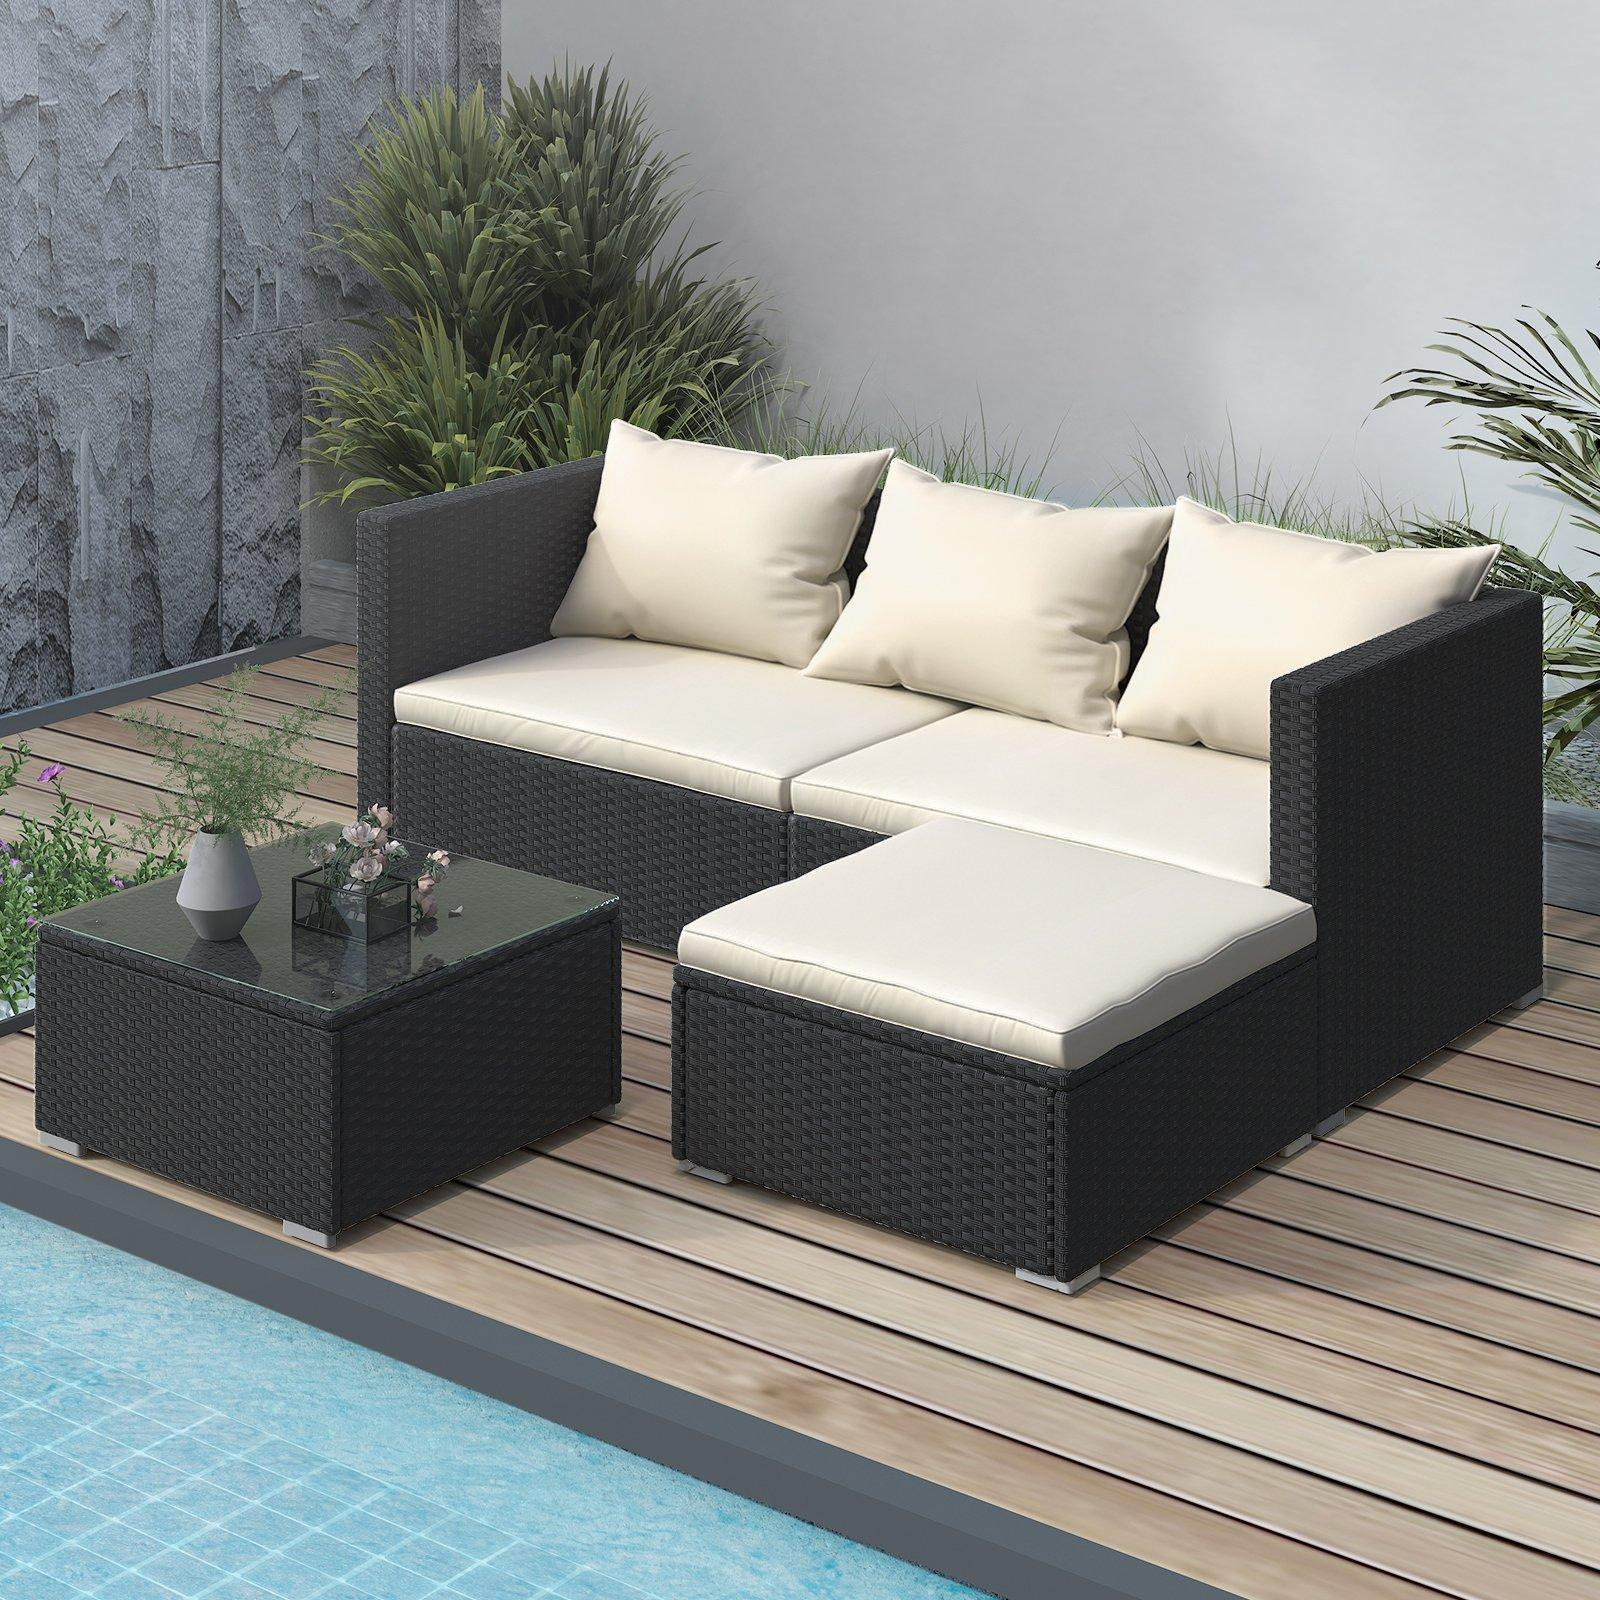 4 Pieces Patio Furniture Sets All Weather Outdoor Sectional Patio Sofa Manual Weaving Wicker Rattan Patio Seating Sofas with Cushion - image 1